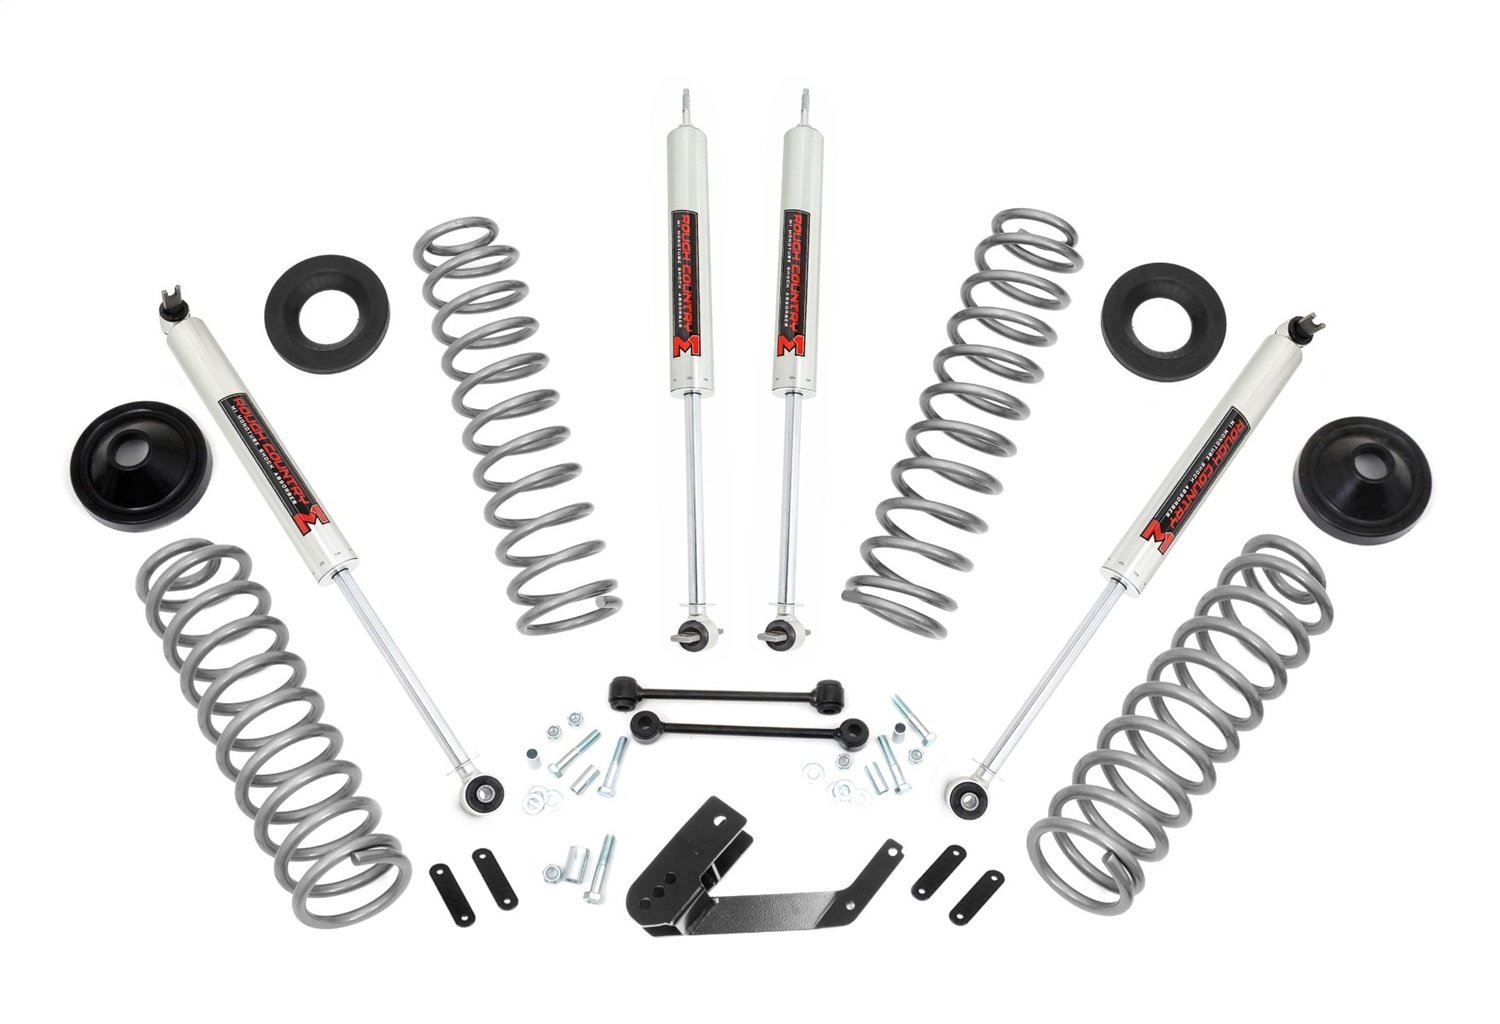 66940 Front and Rear Suspension Lift Kit, Lift Amount: 3.25 in. Front/3.25 in. Rear